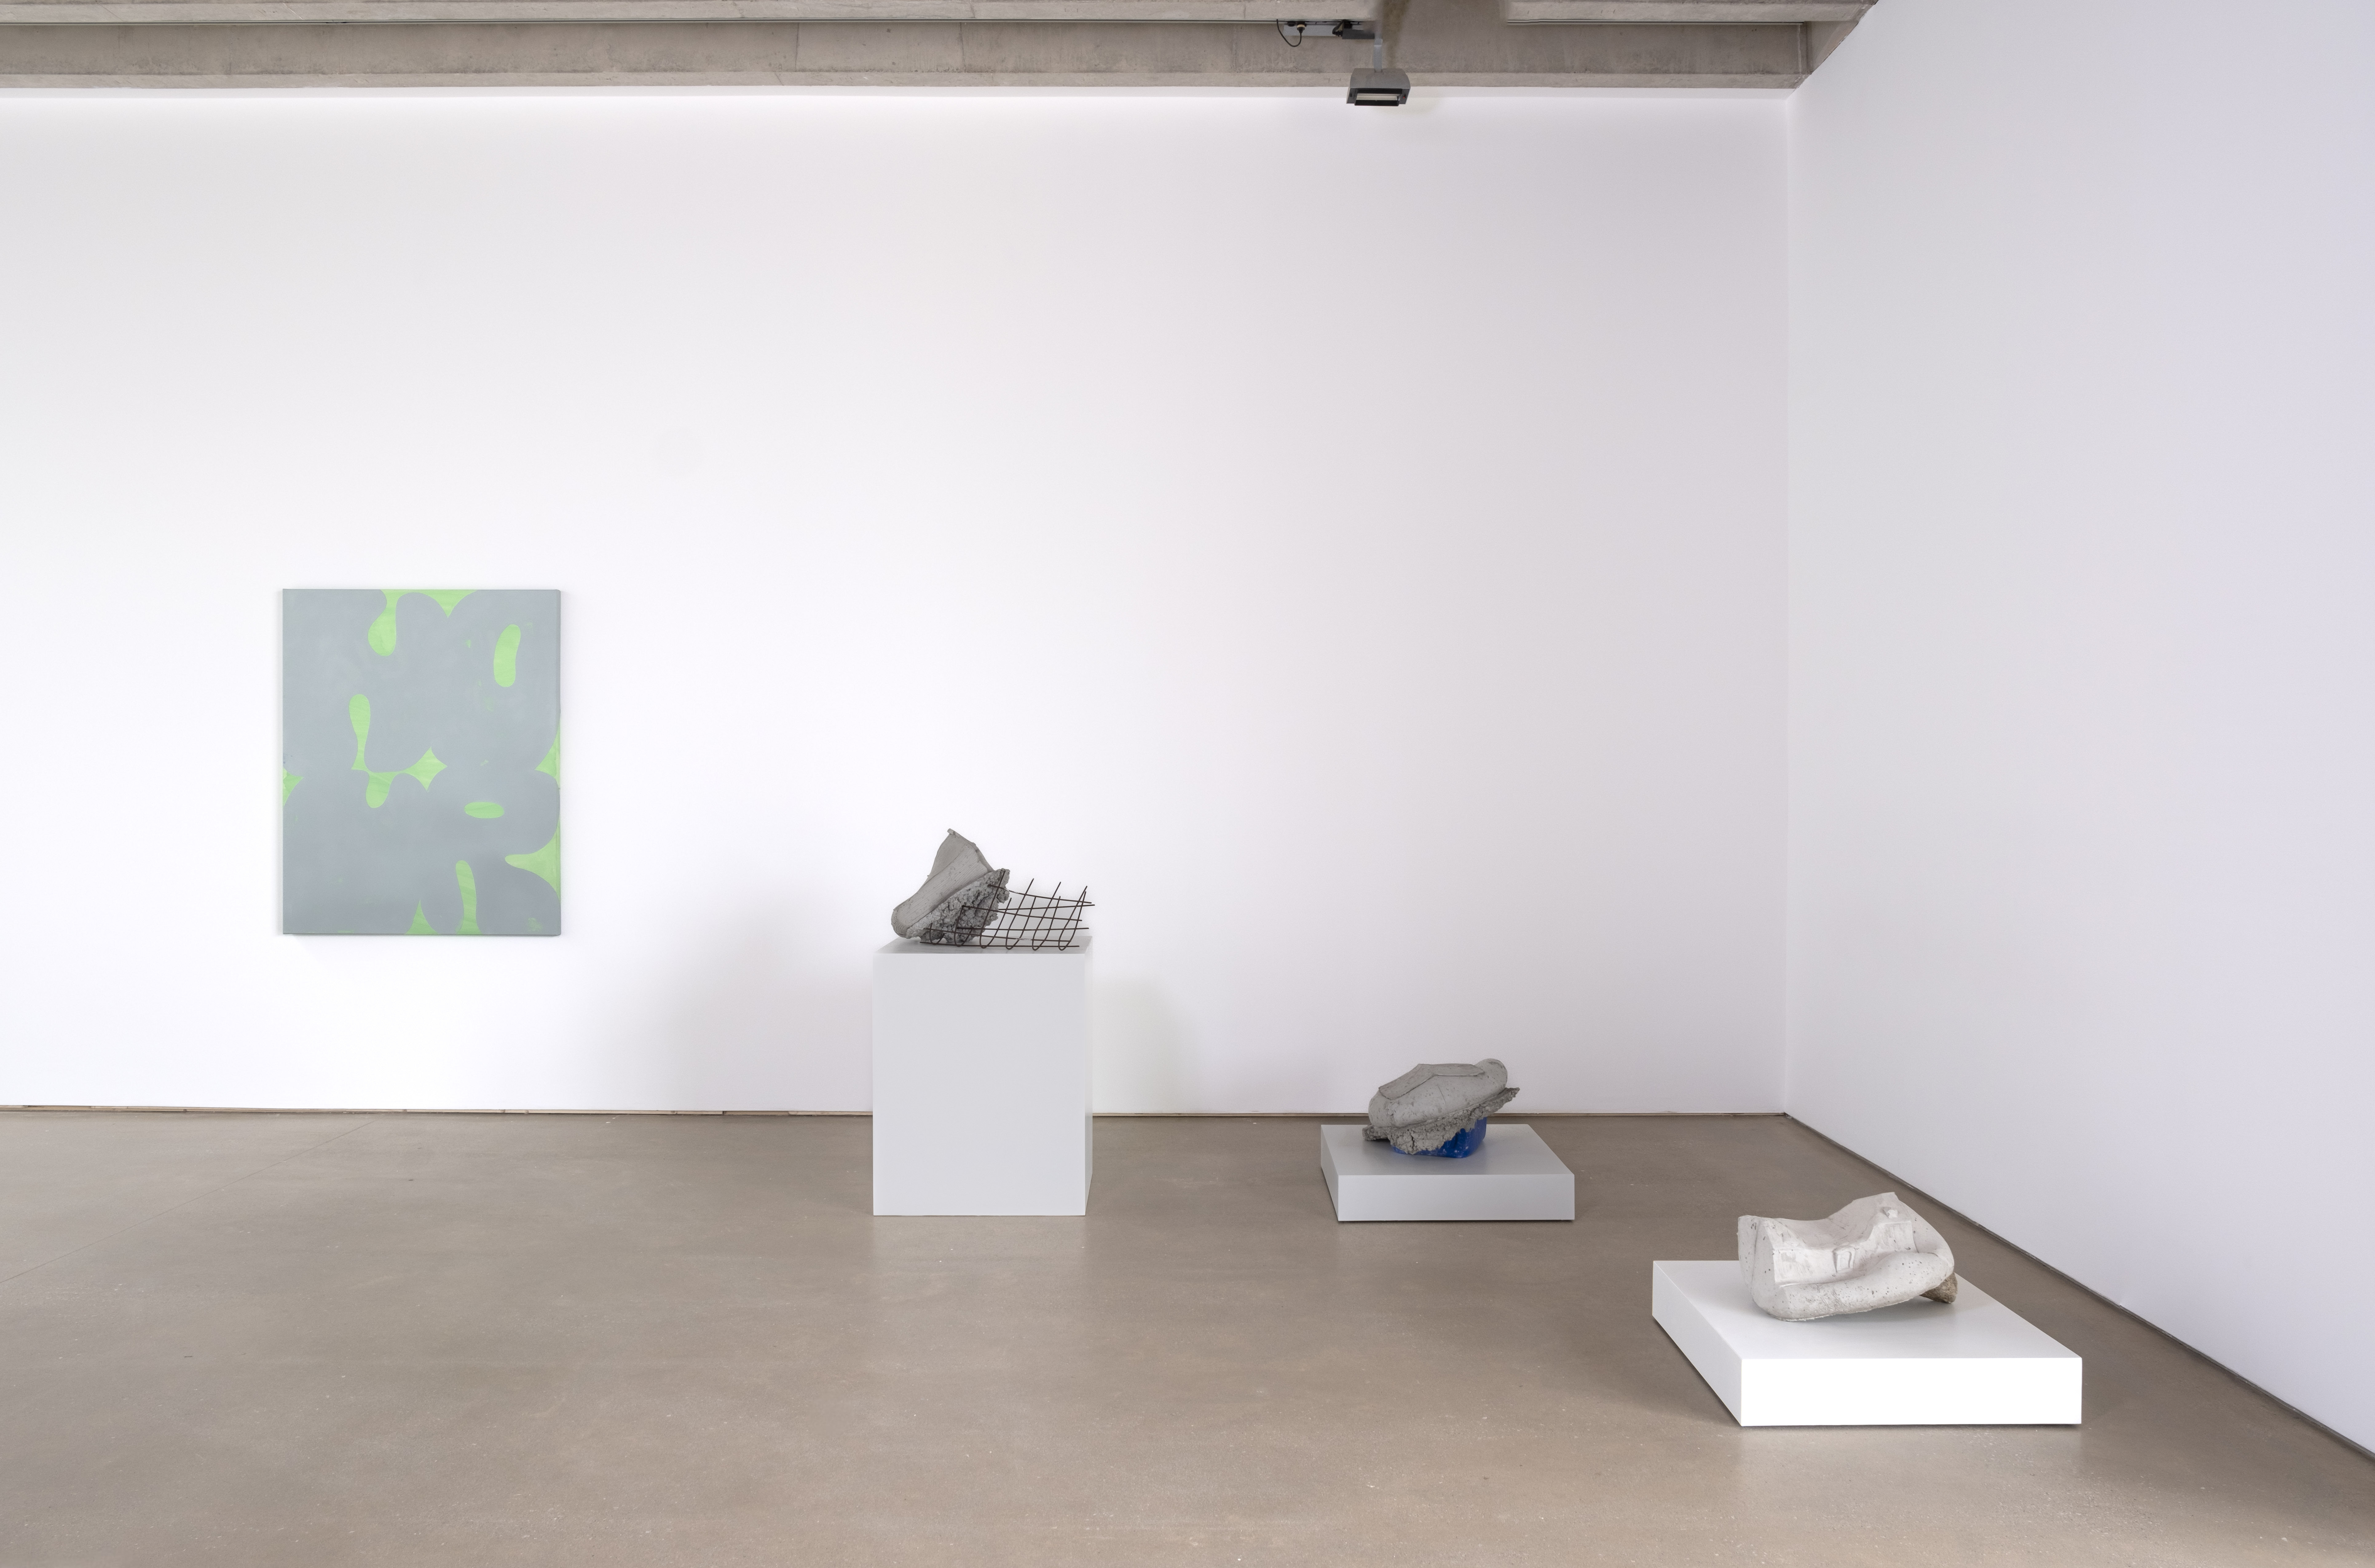 Three sculptures on plinths and a green and grey painting hung on the wall in a gallery